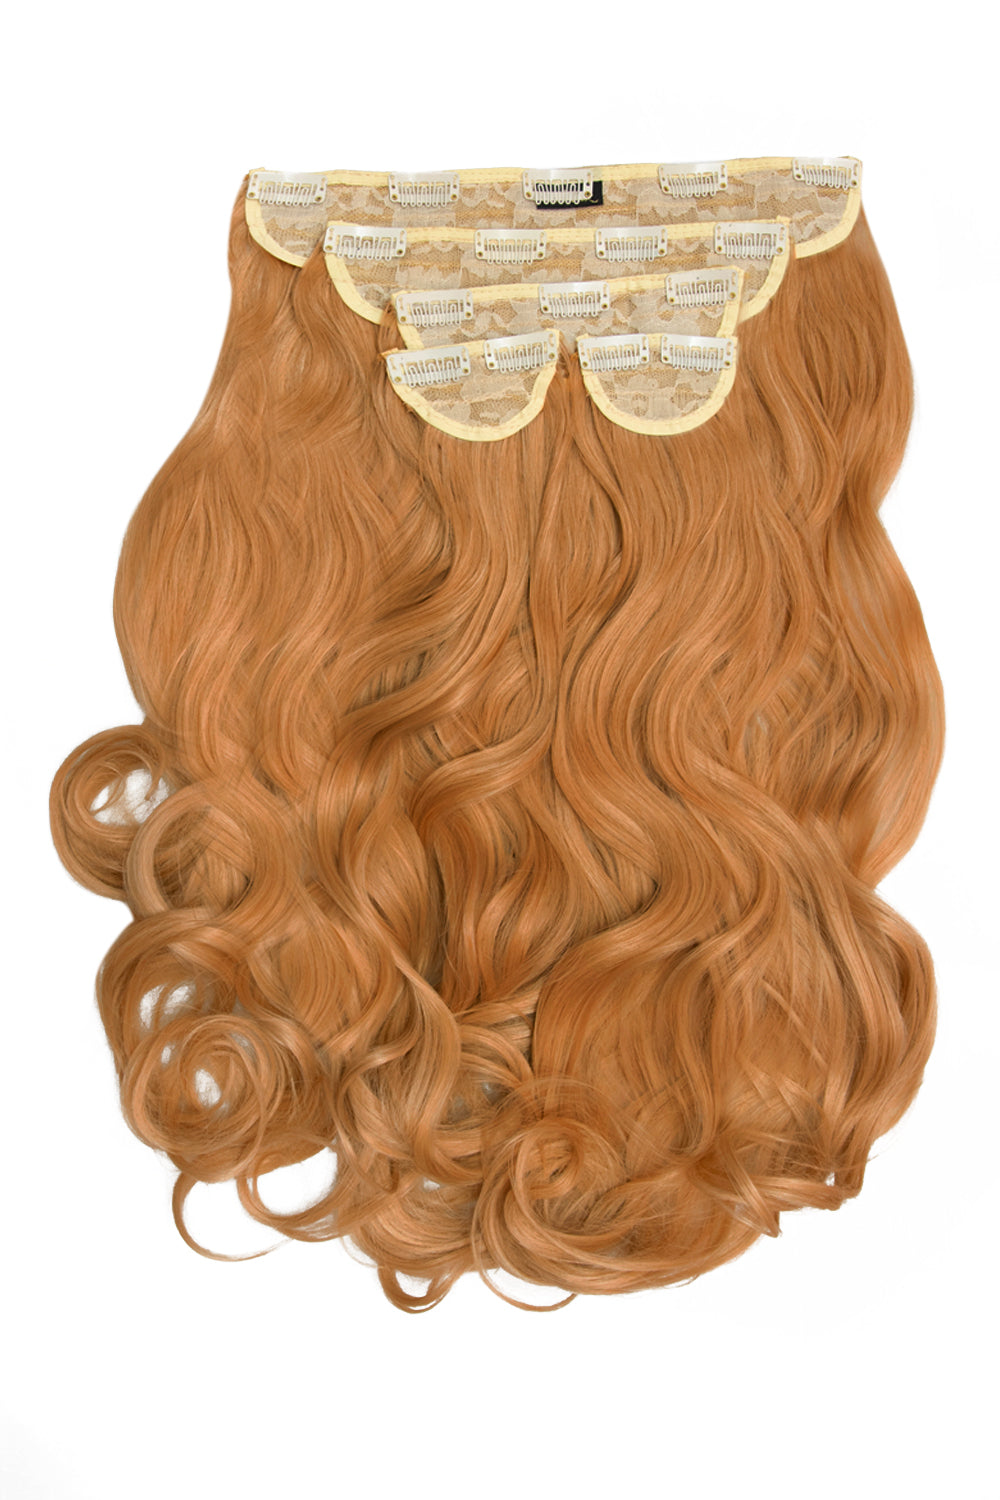 Super Thick 22" 5 Piece Curly Clip In Hair Extensions - Strawberry Blonde